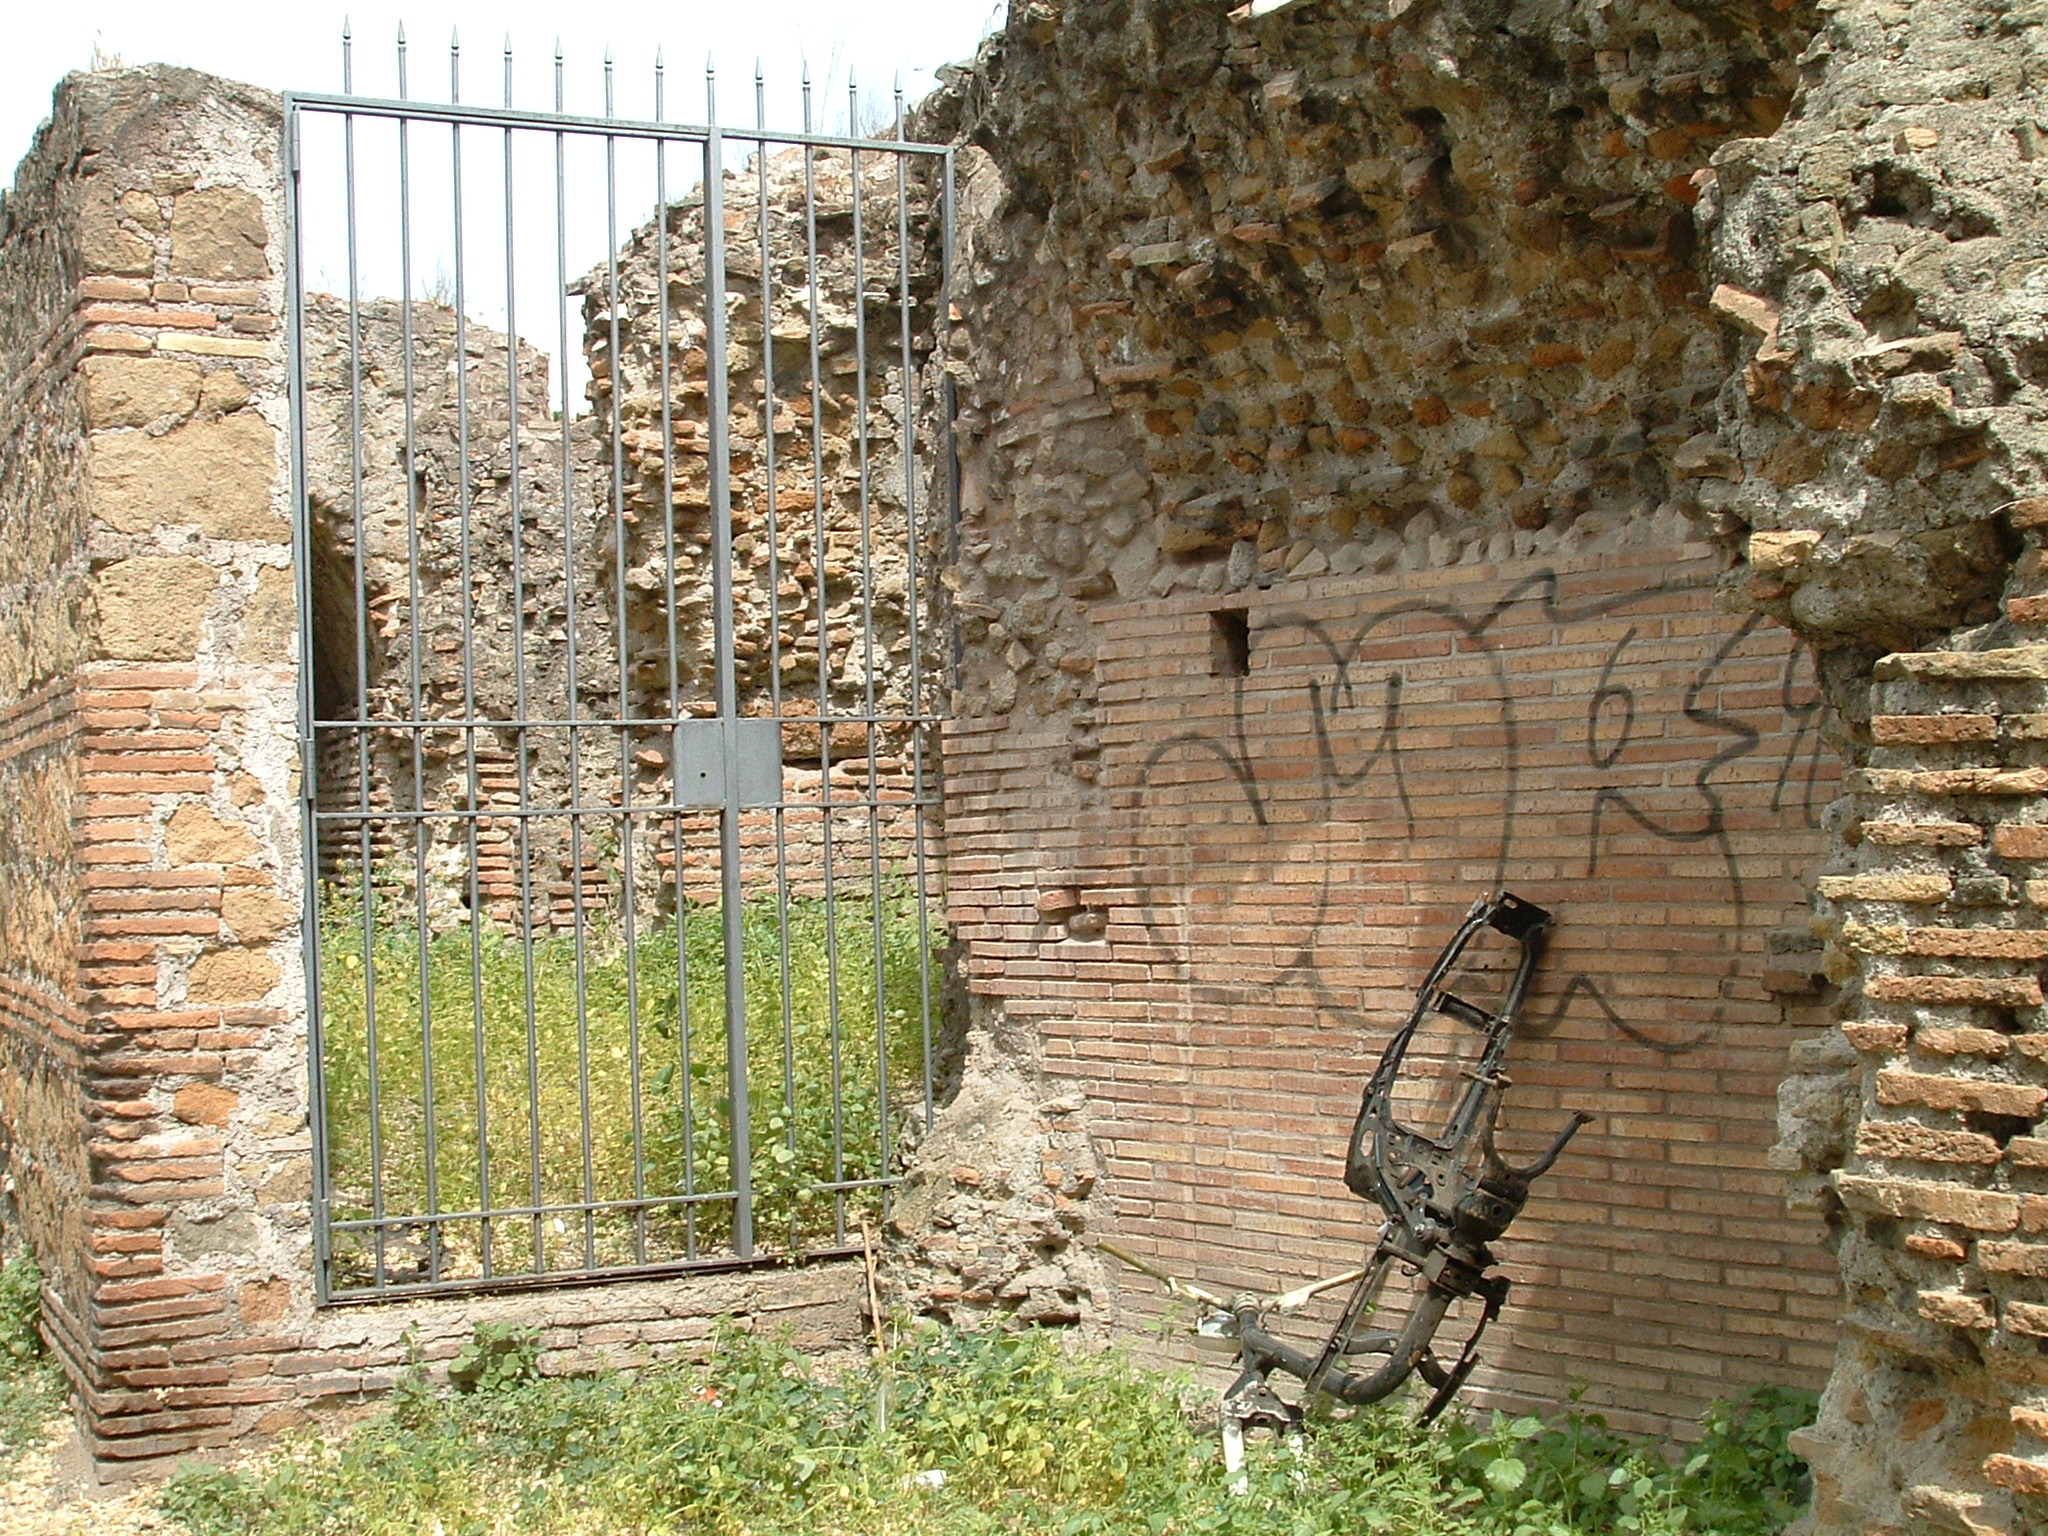 the brick wall and gate in an old cemetery